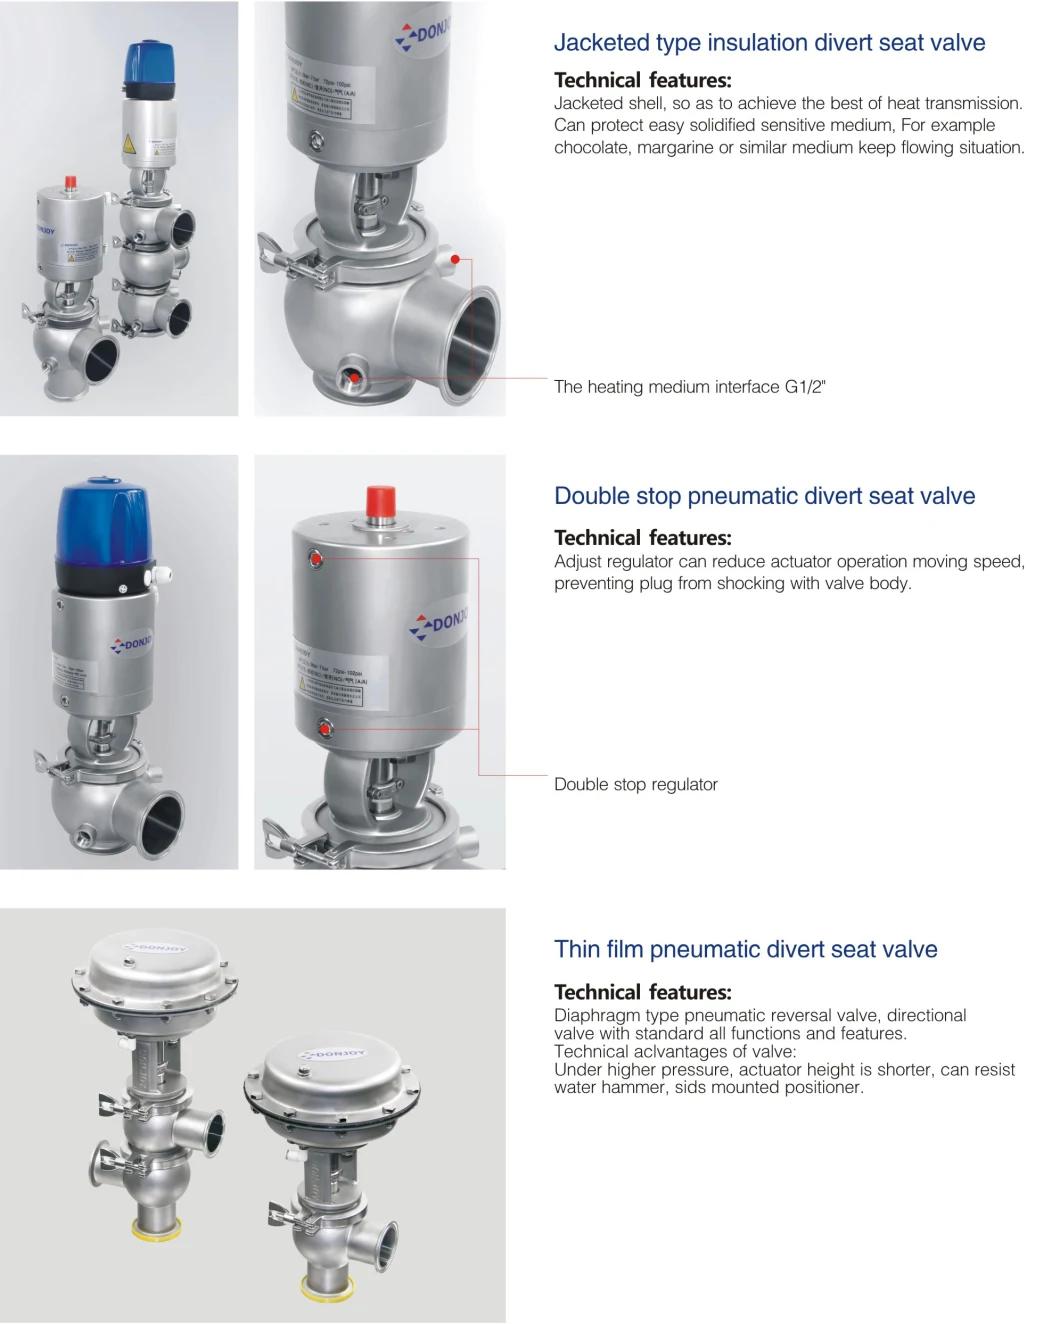 3A Certified Sanitary Tri Clover Shut-off and Diverter Valve